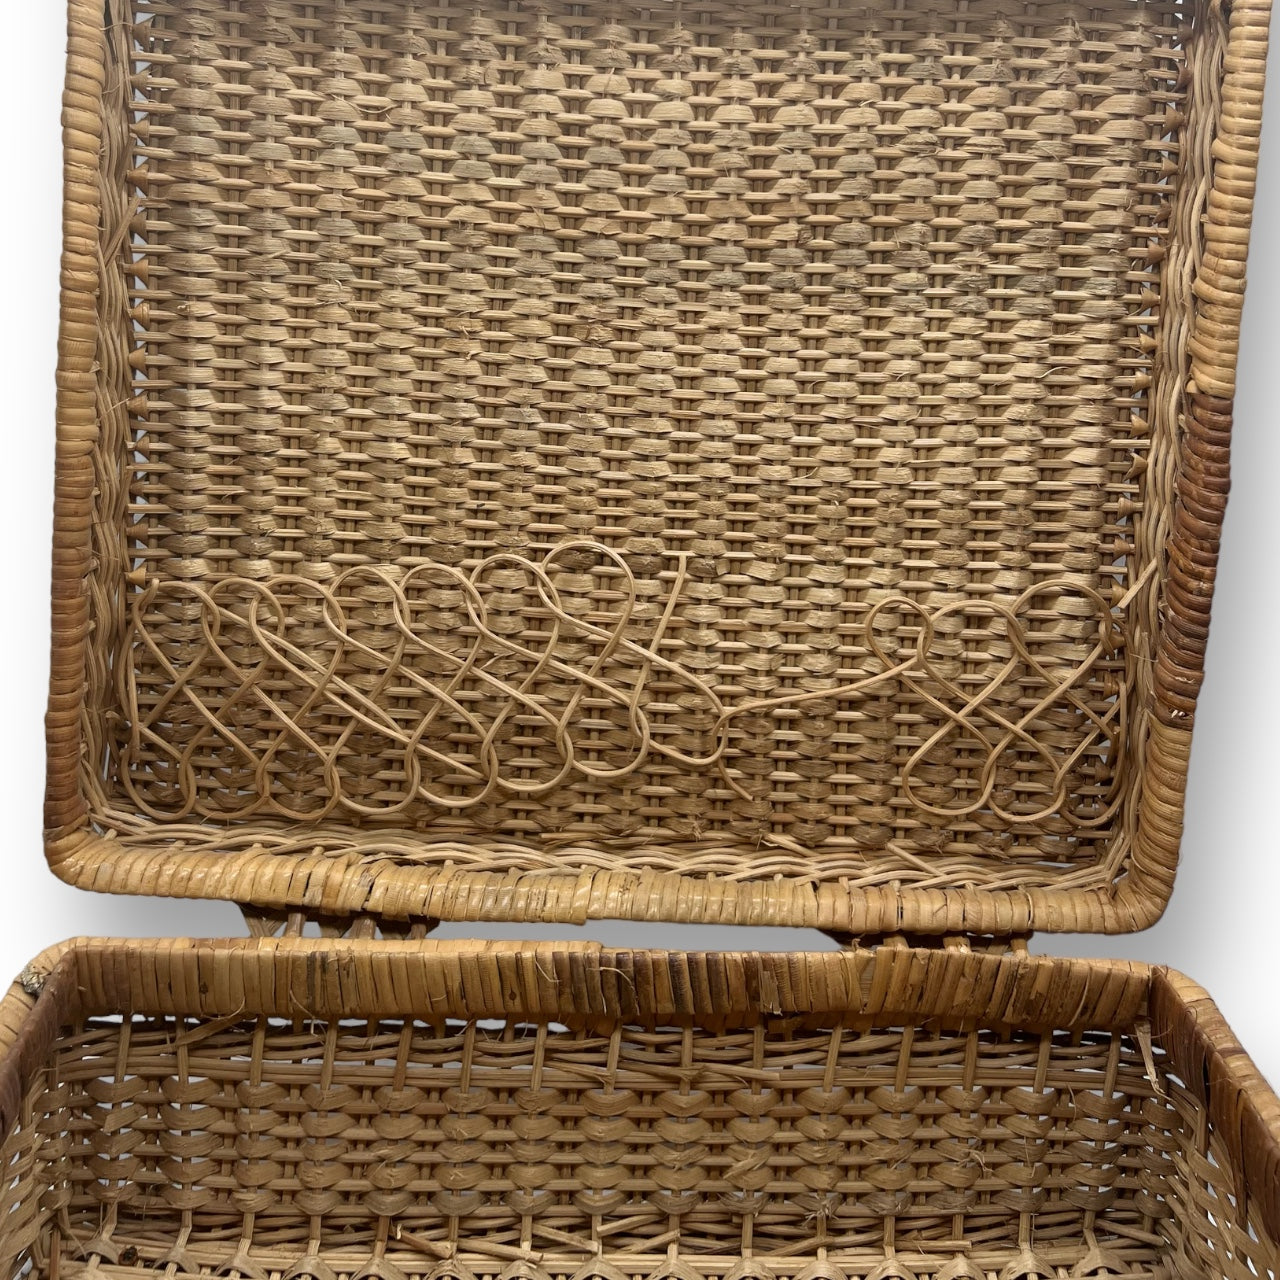 Vintage Handmade Woven Picnic Wicker Basket Briefcase Made in Hong Kong - Set of 2